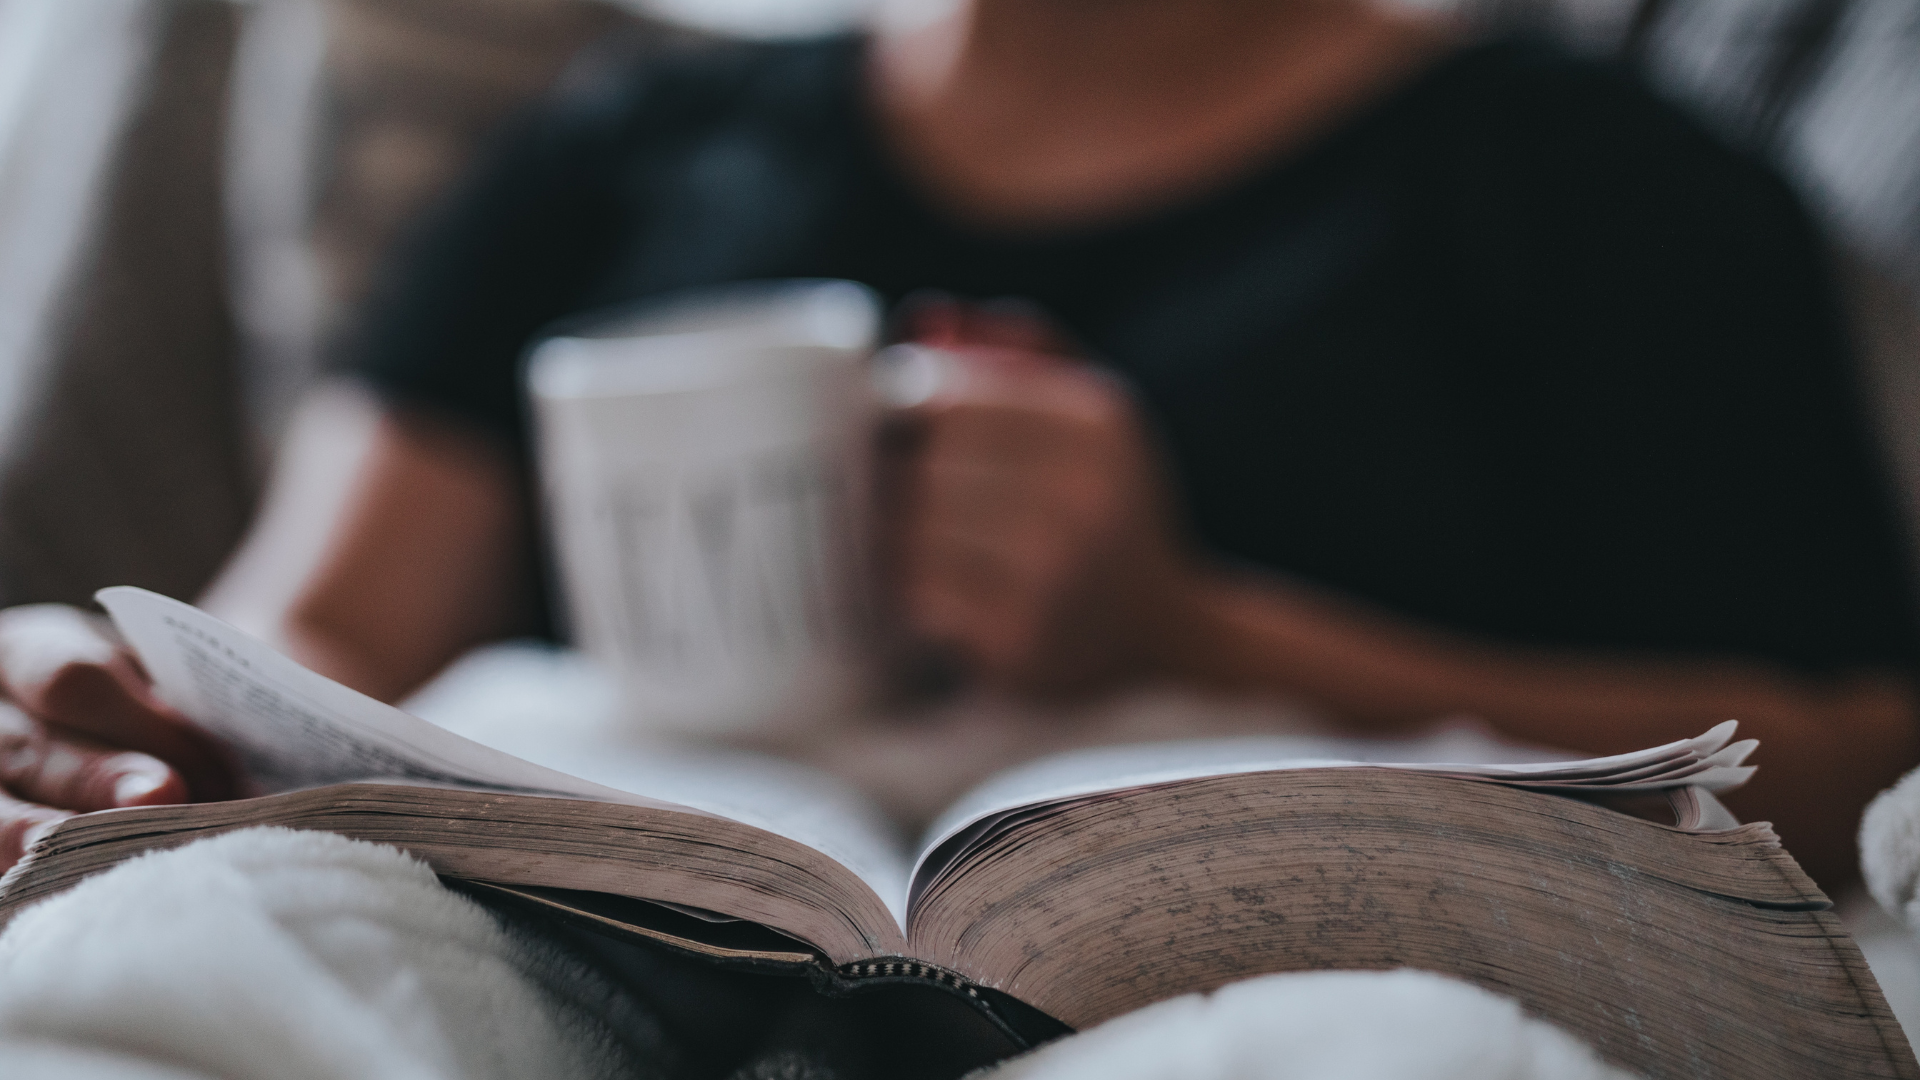 Person sitting in a chair reading the Bible while holding a mug and snuggling in a blanket